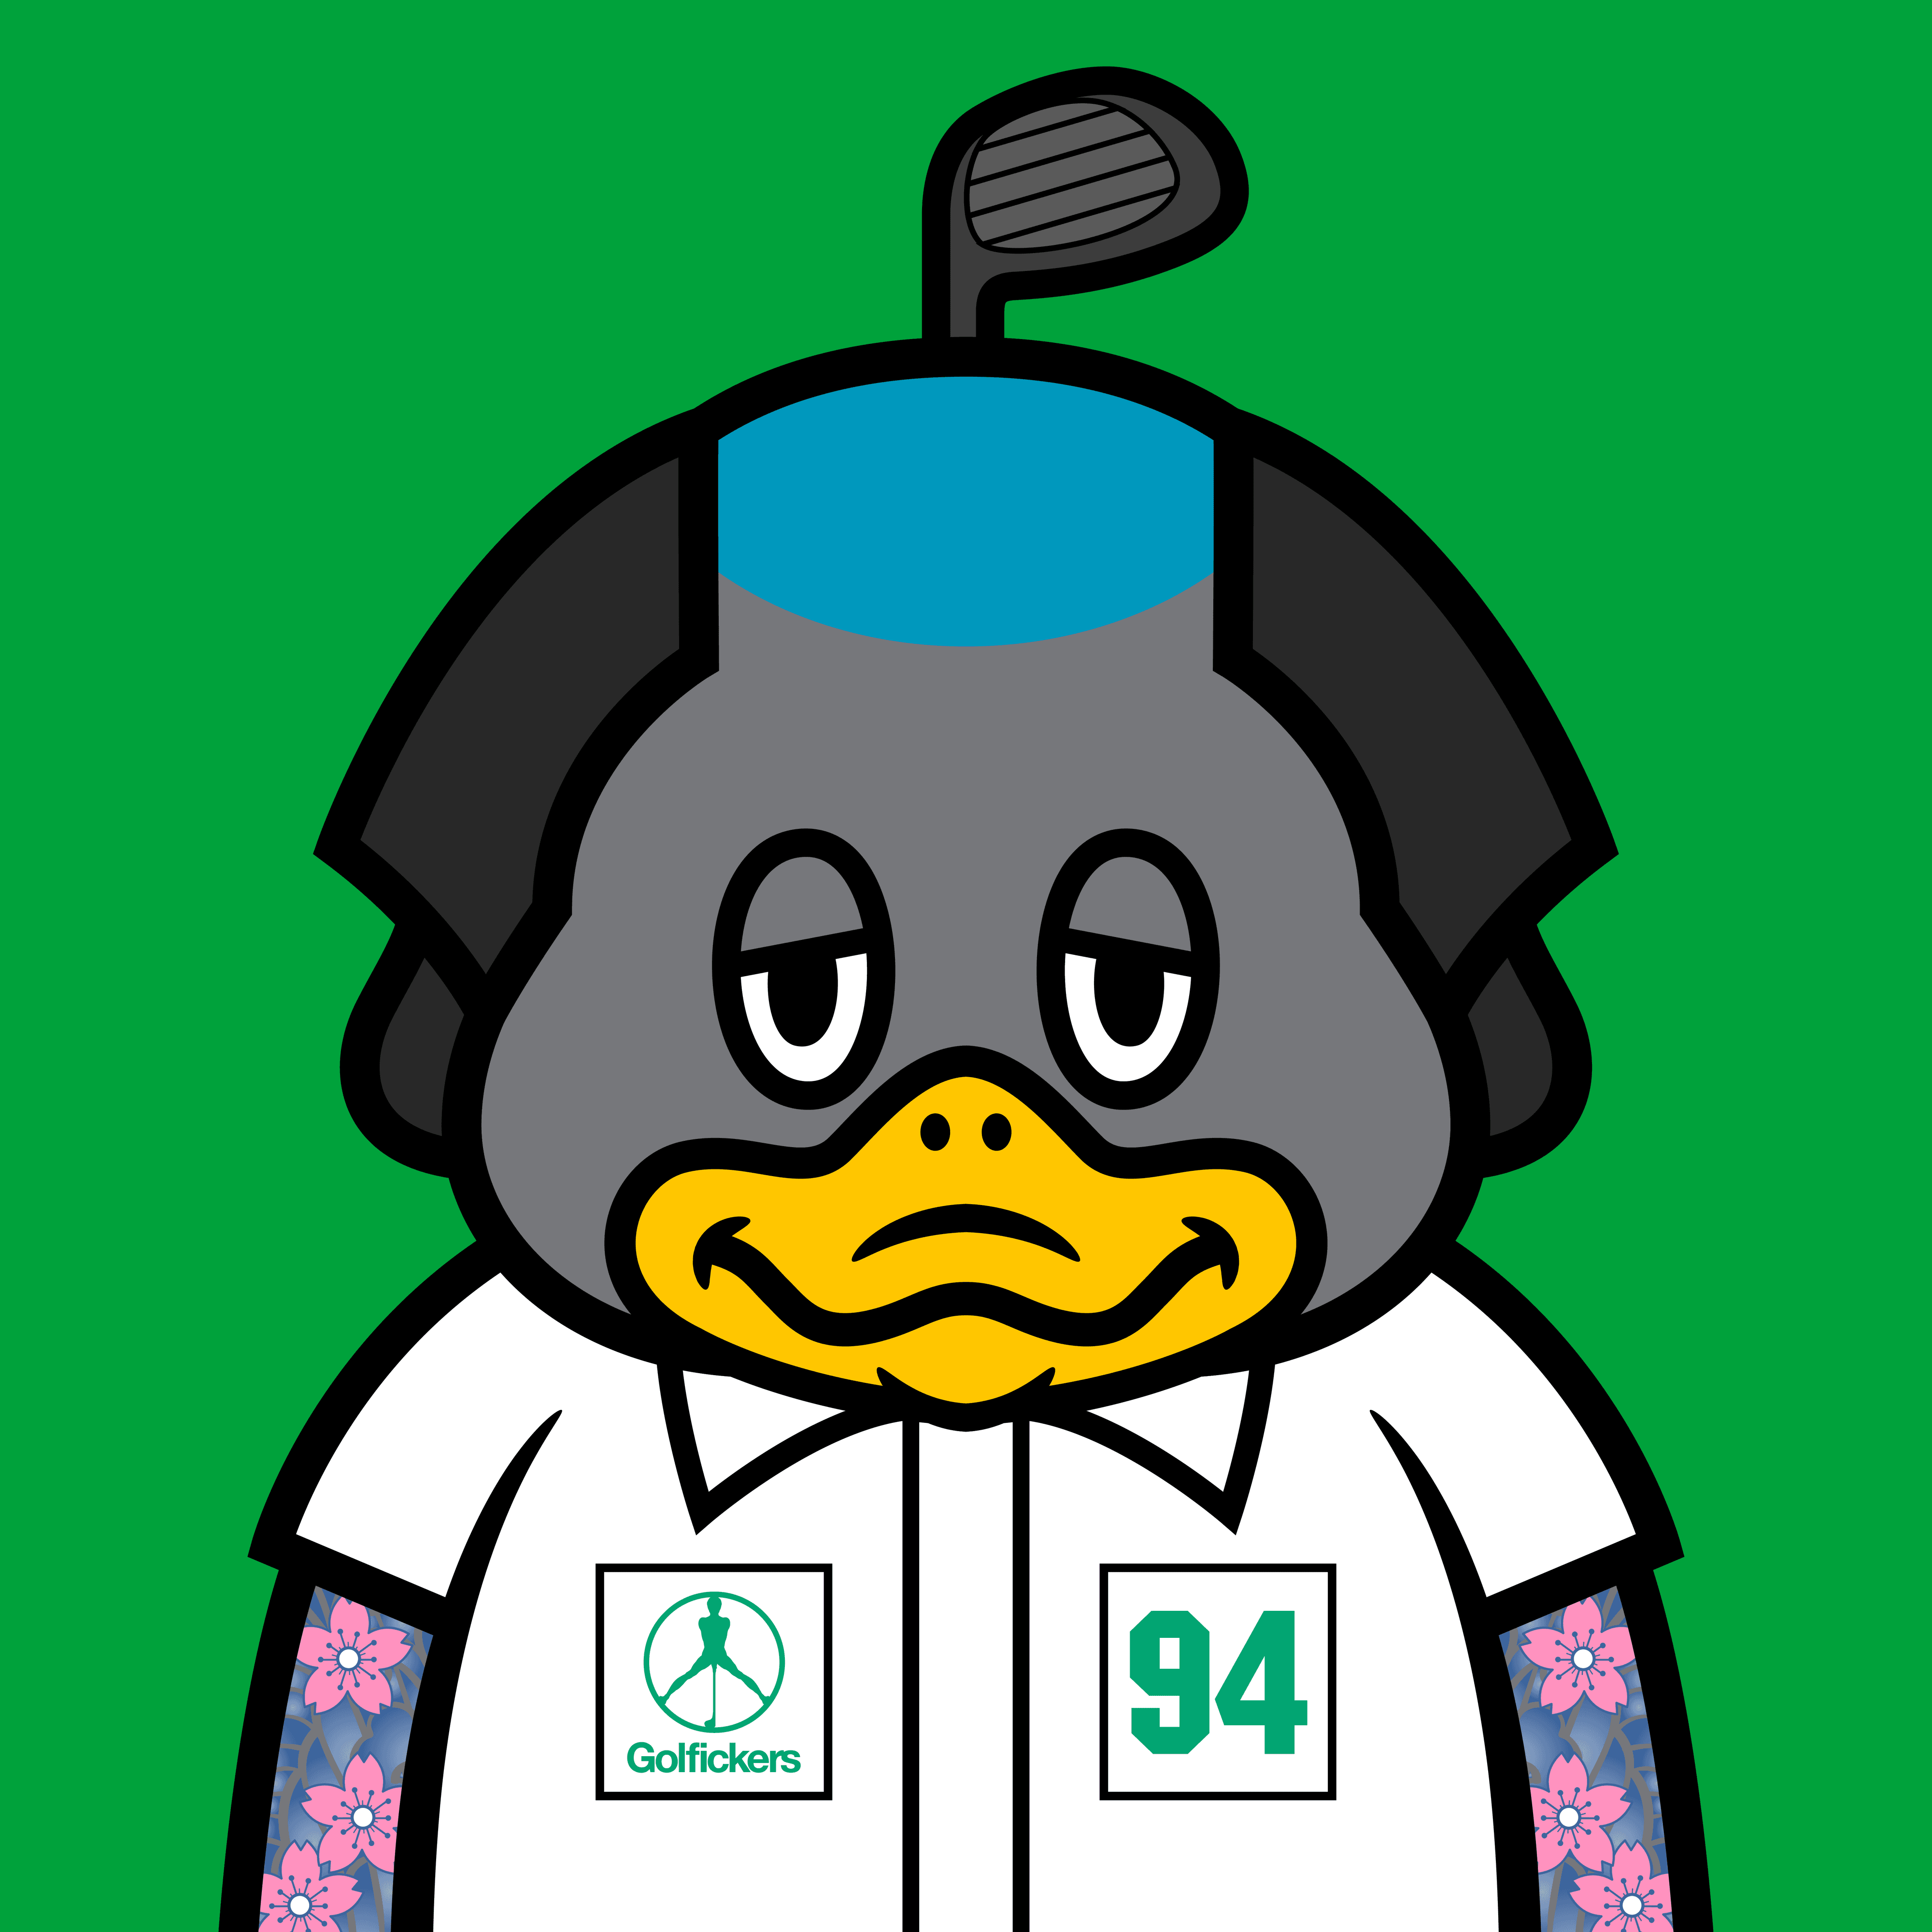 Golfickers The Duck #0094